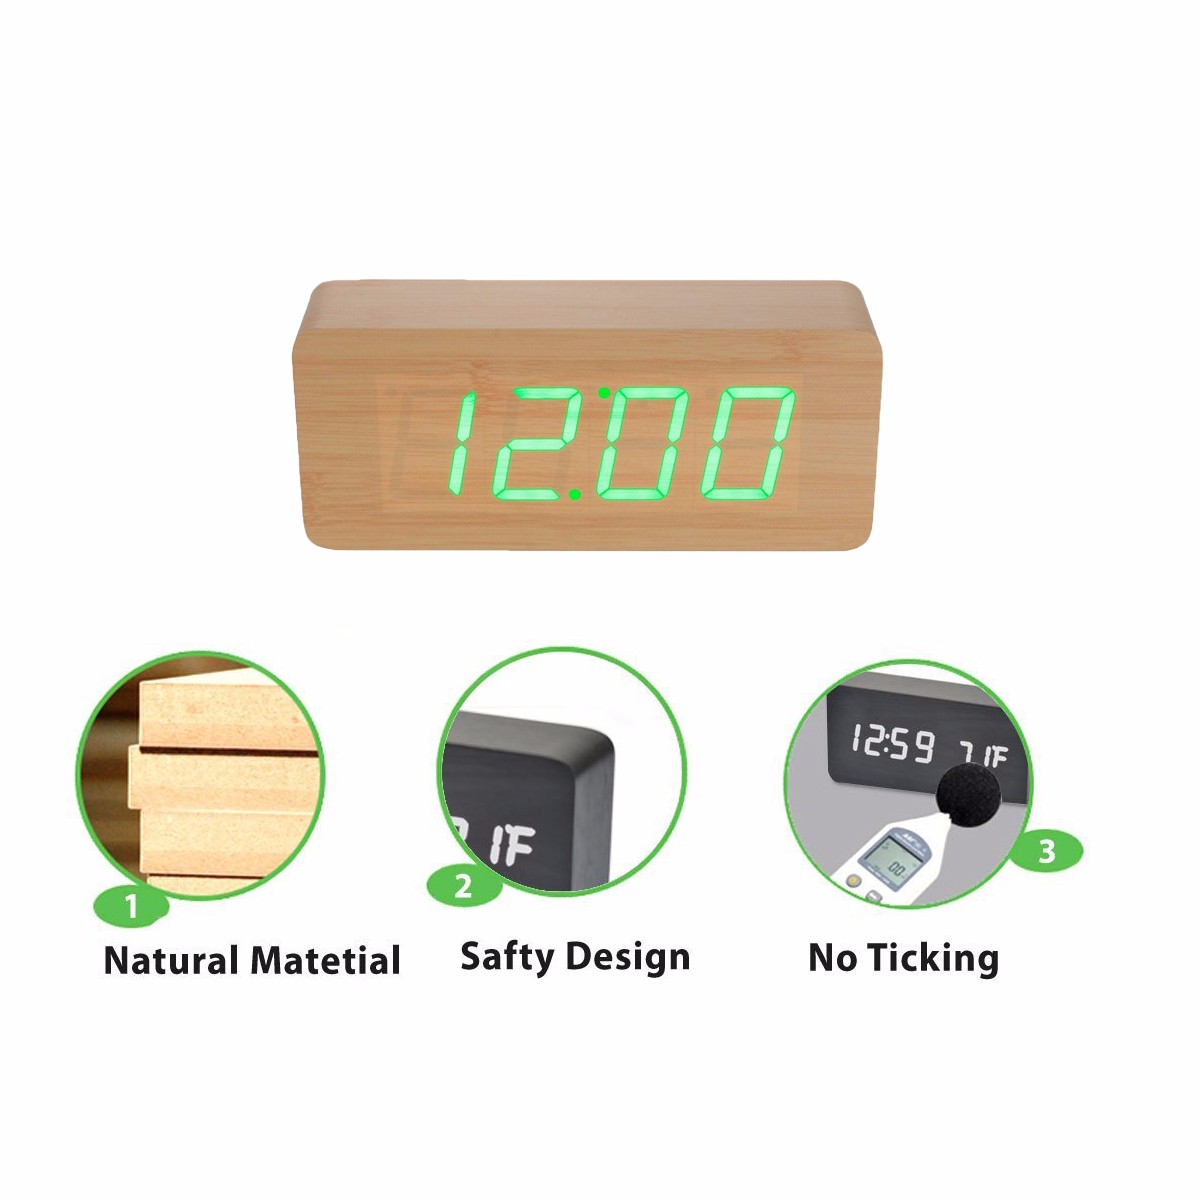 Multifunctional-Wooden-Digital-Clock-Two-Modes-Default-Display-Time-Built-in-Battery-Voice-Control-S-1891907-4